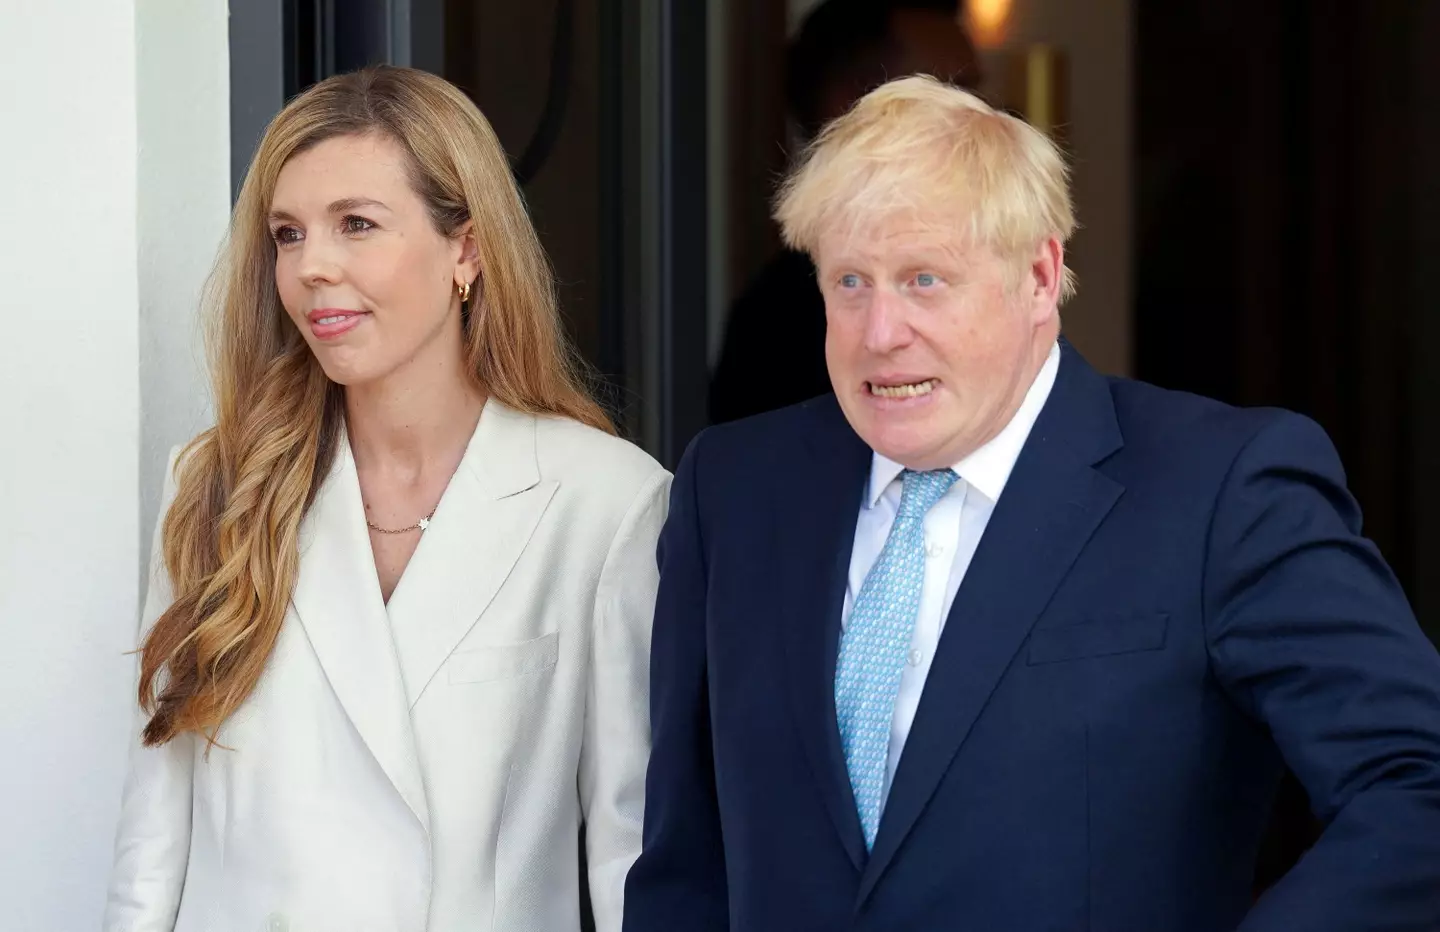 A leaked invoice obtained by the Independent has revealed how much Boris Johnson and his wife spent on refurbishing the flat at Downing Street.